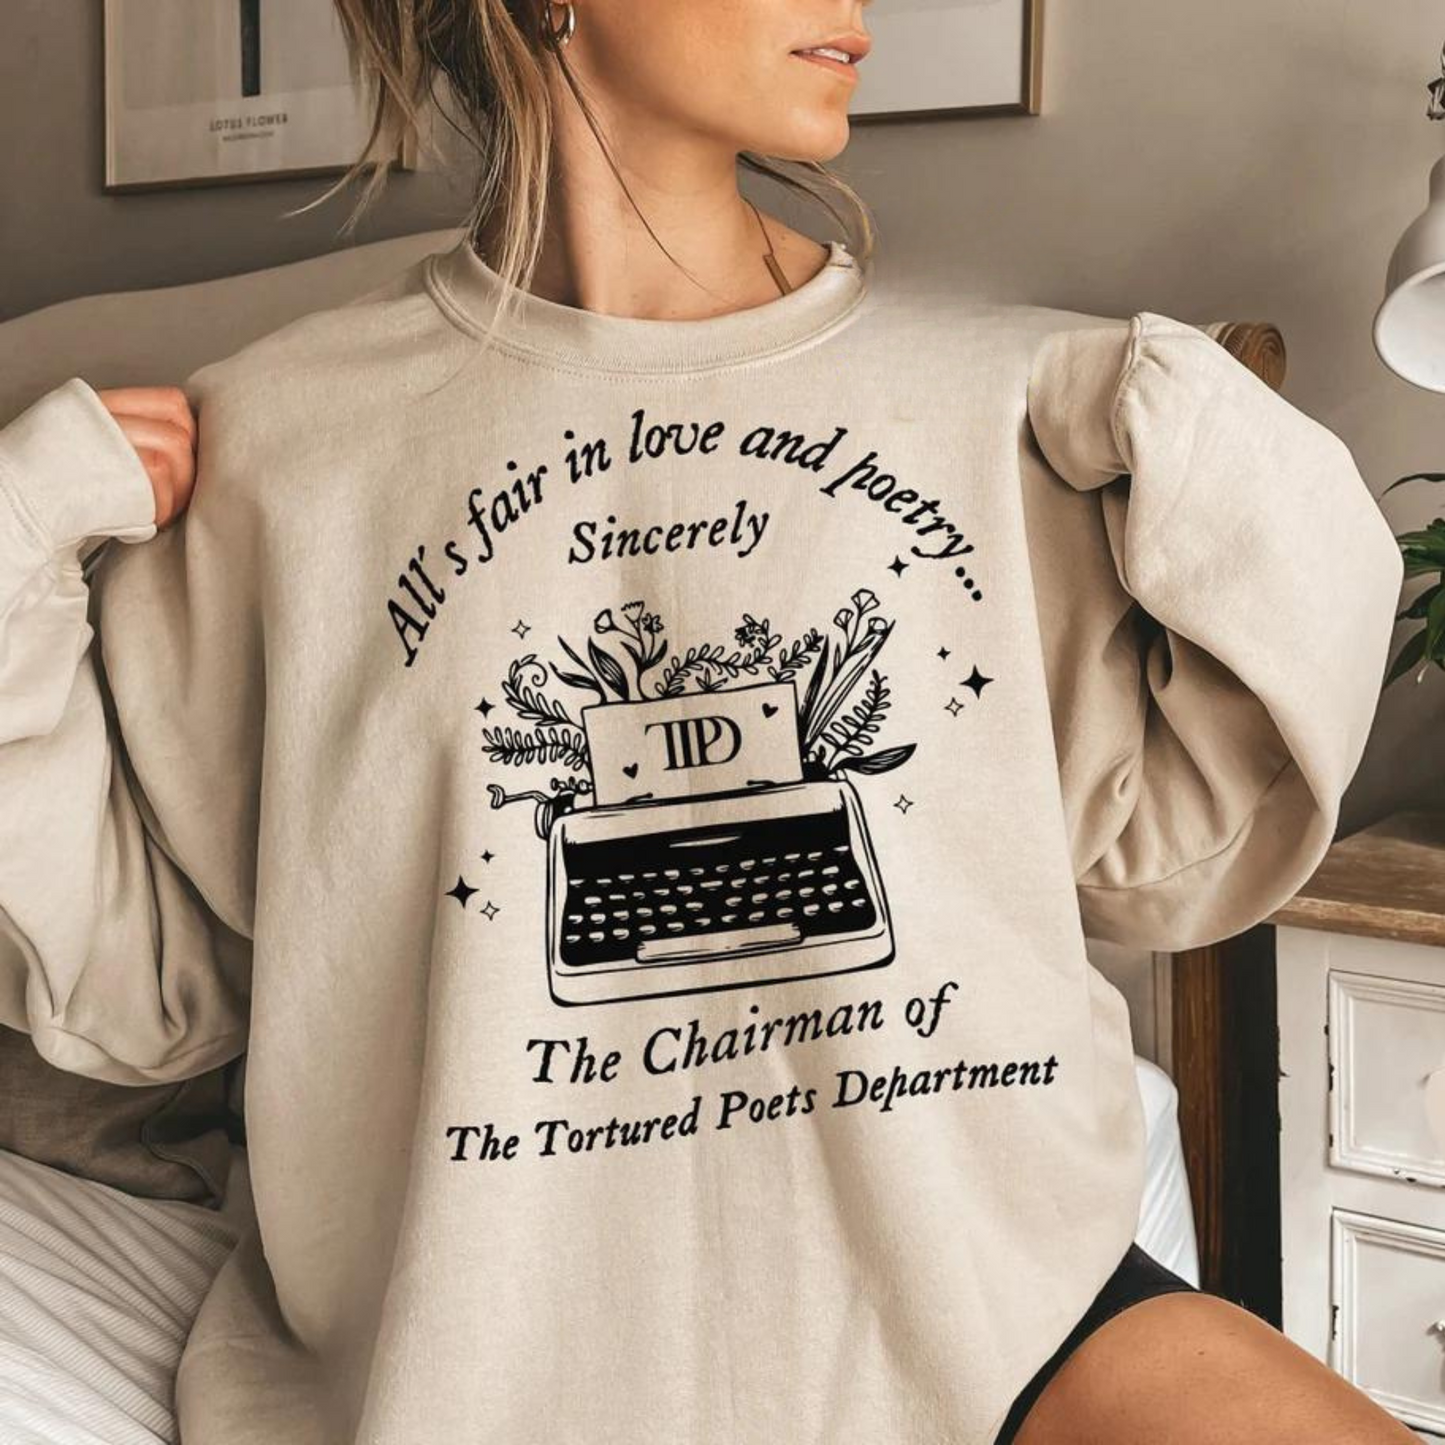 All's Fair In Love And poetry Sweatshirt - Khaki TTPD Sweater